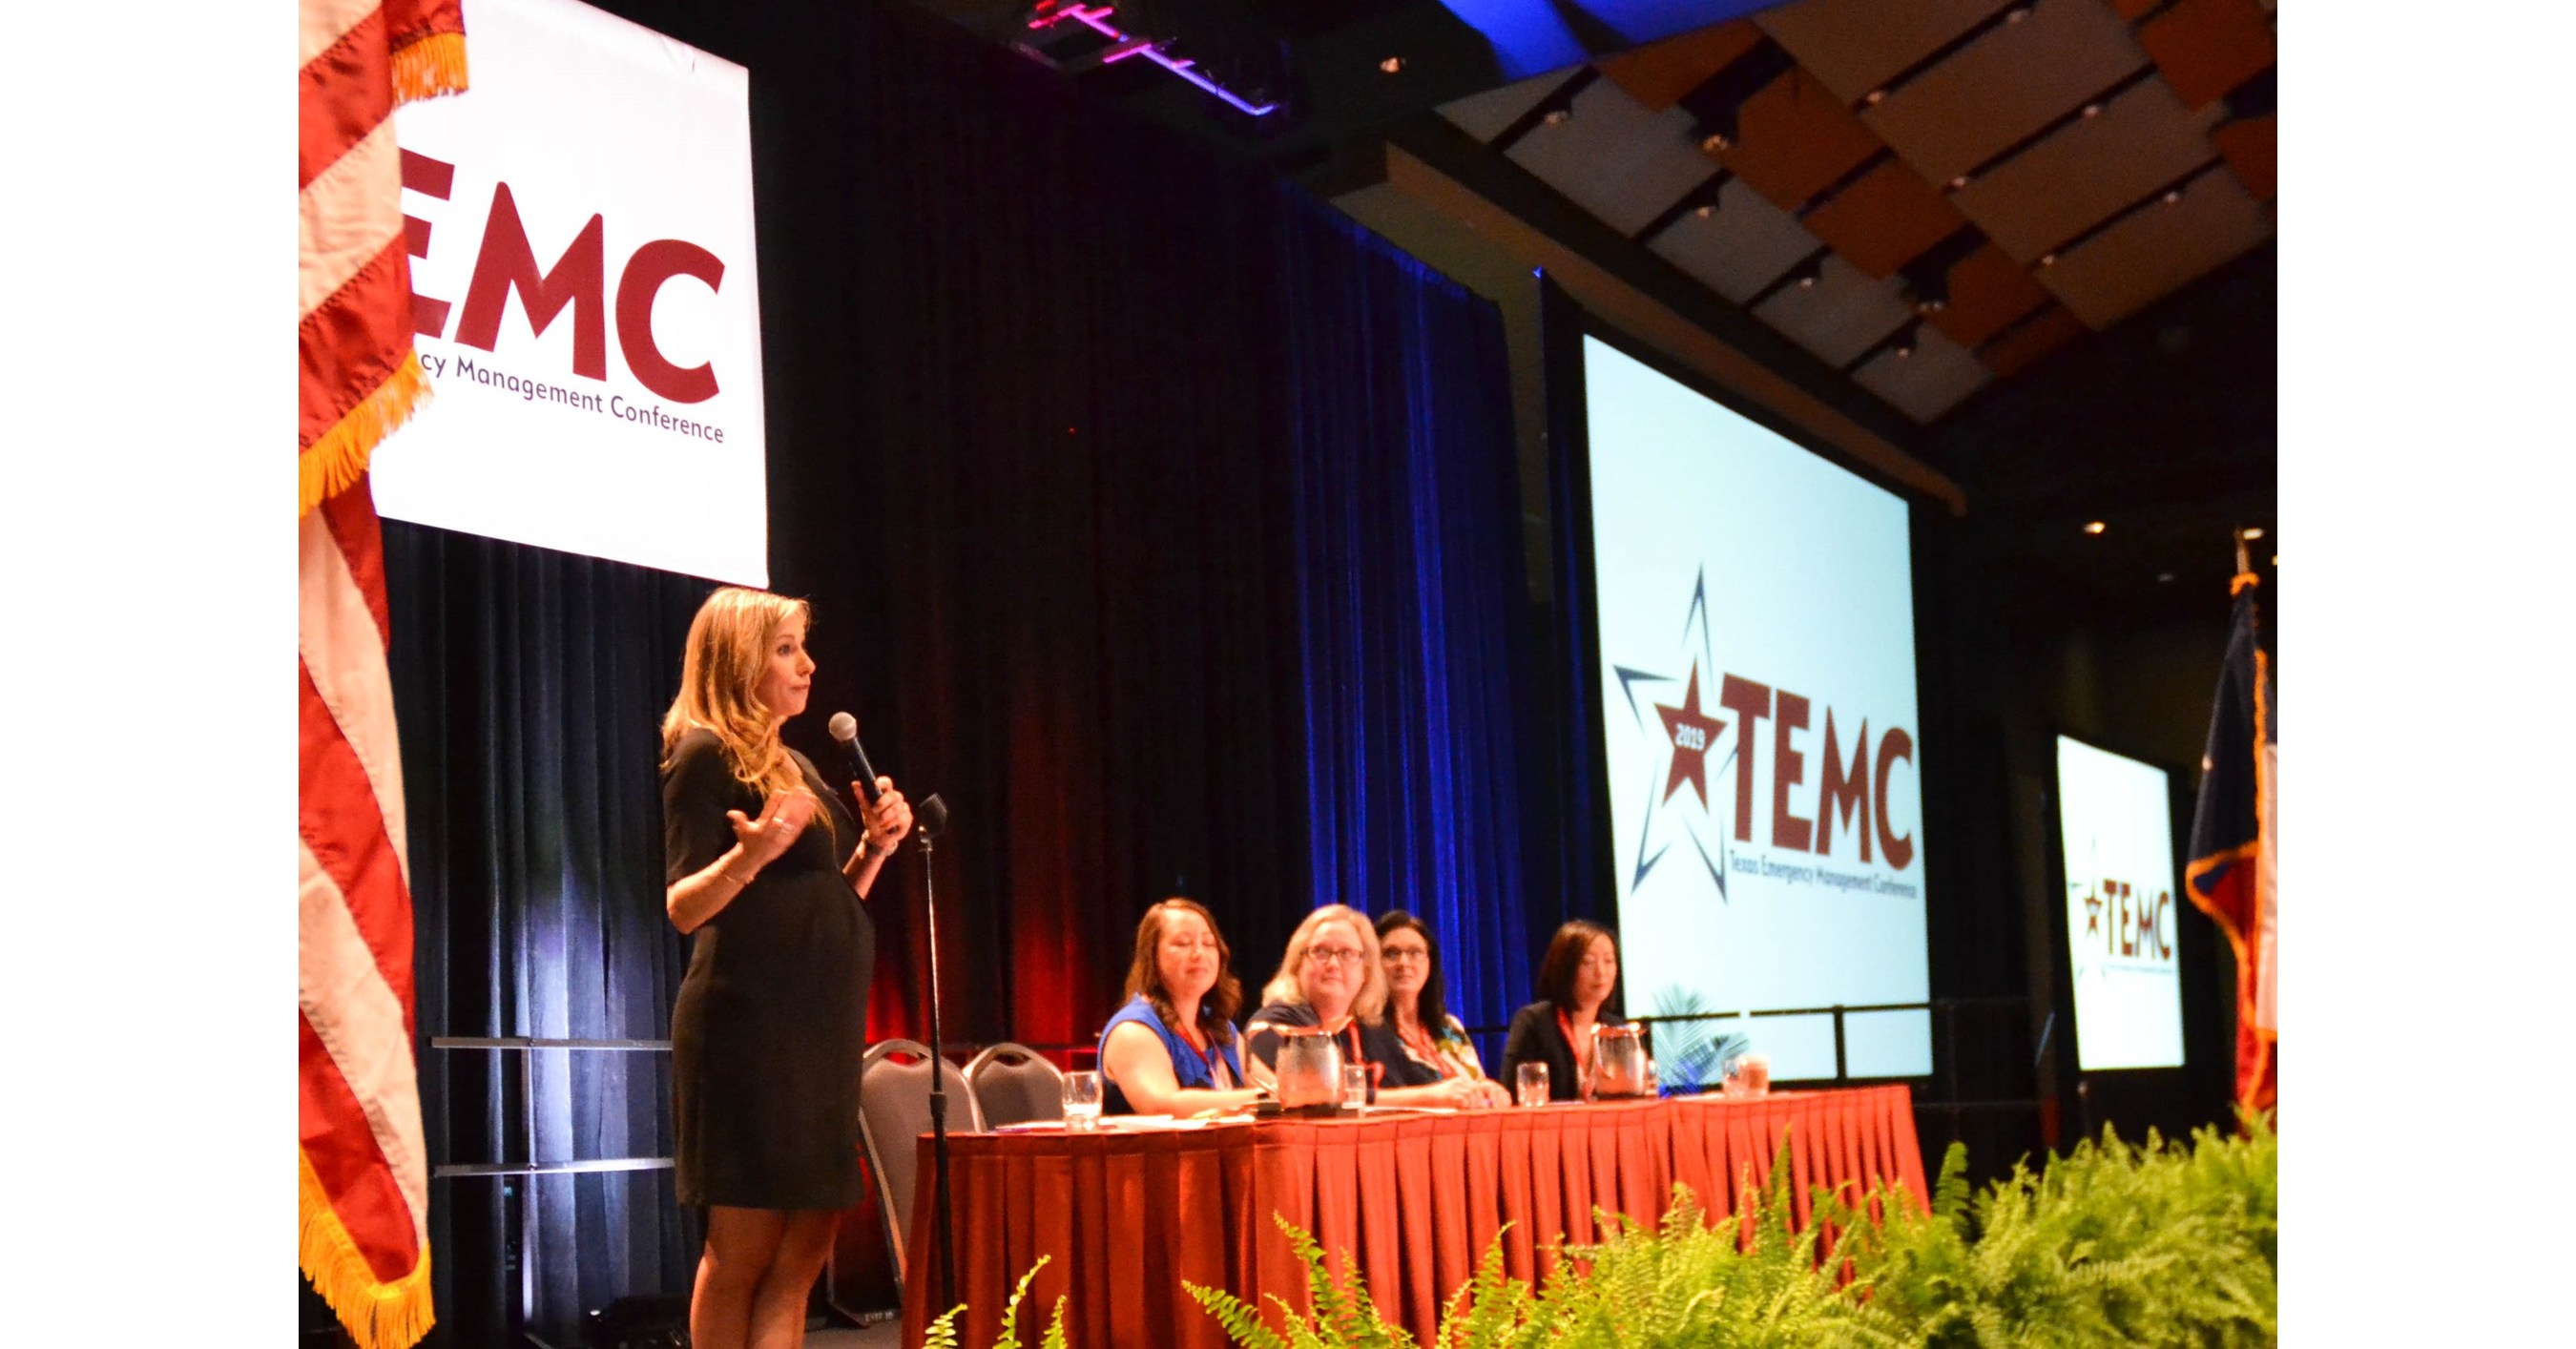 Texas Emergency Management Conference Panel Highlights Key Women